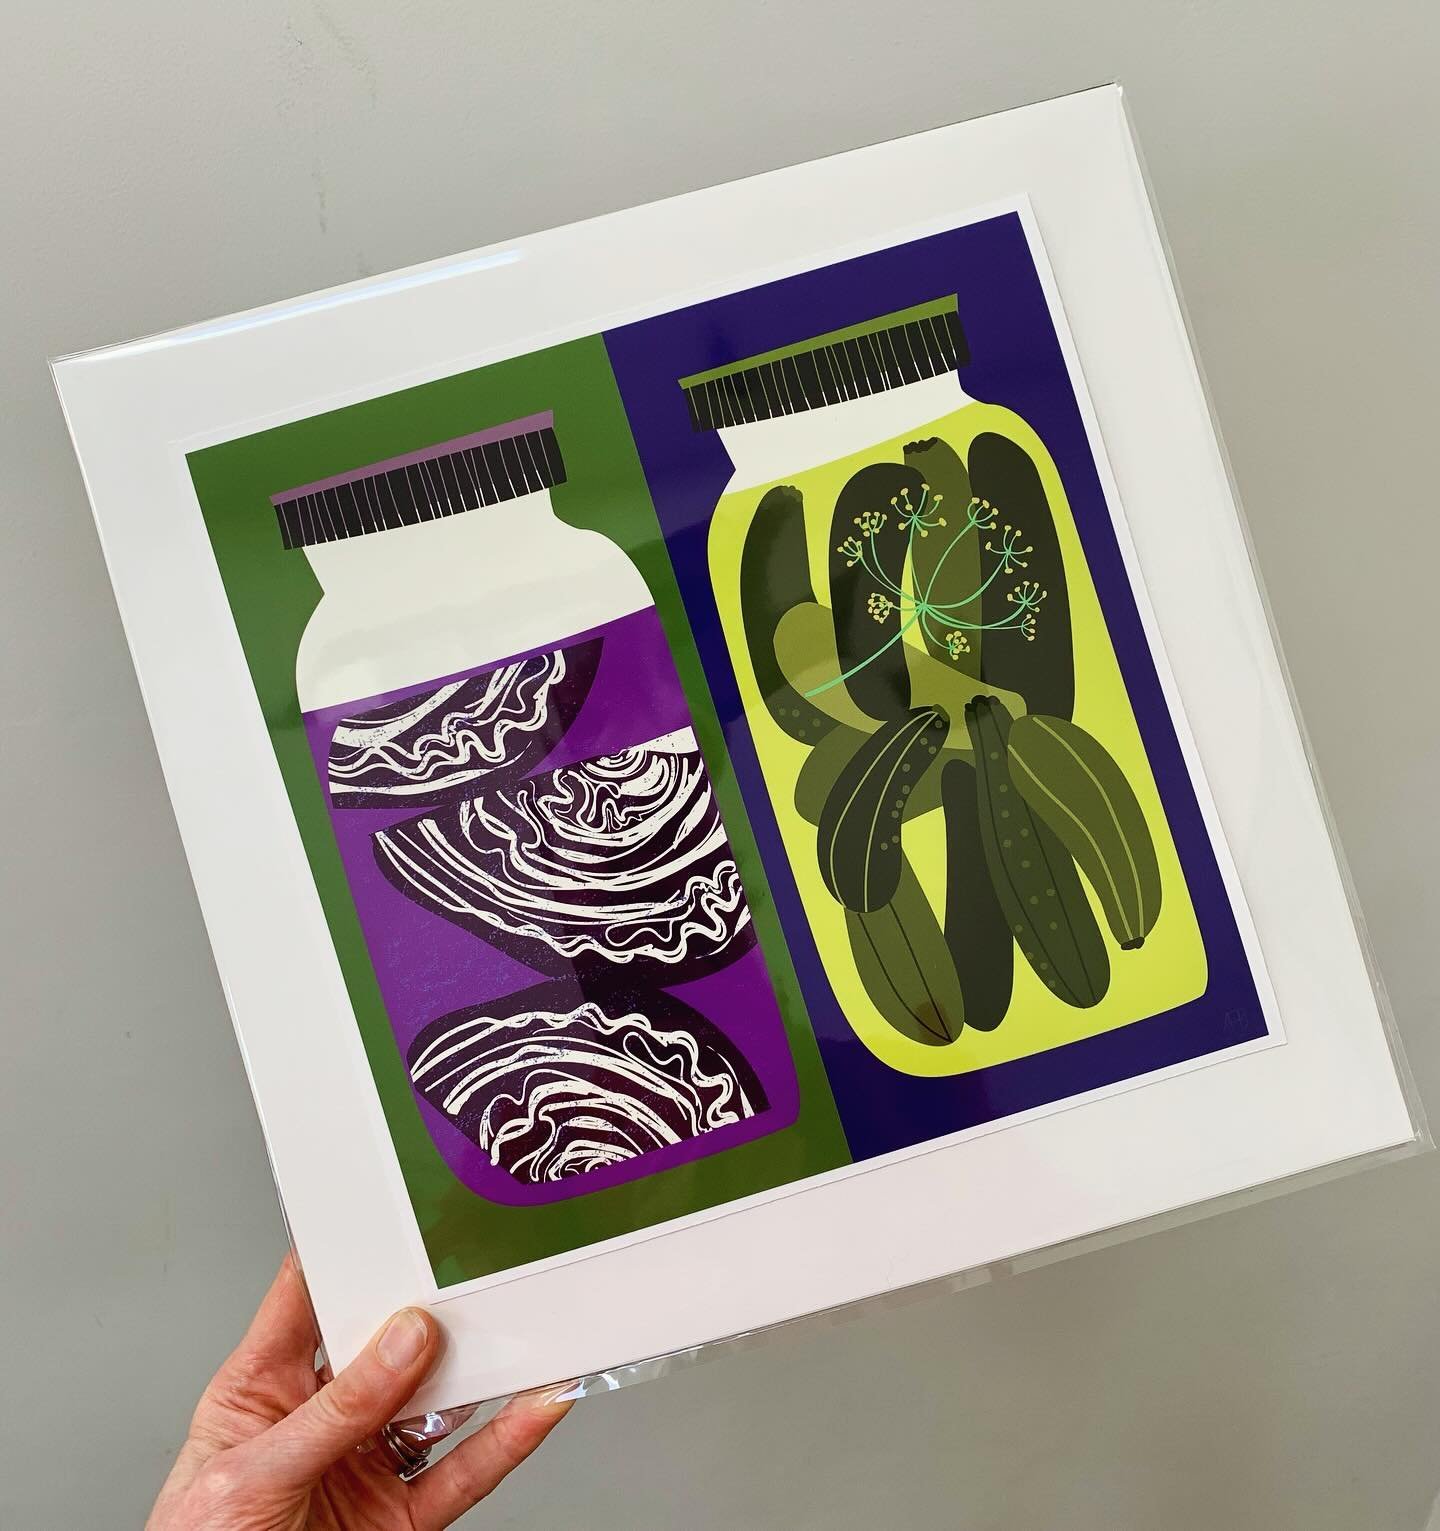 A new pickle print following on from an older customer favourite that&rsquo;s still so popular - swipe to view! 

Find my range of prints, cards and melamine at @miltonhousebrighton as part of the @artistsopenhouses every weekend in May 

Open from 1